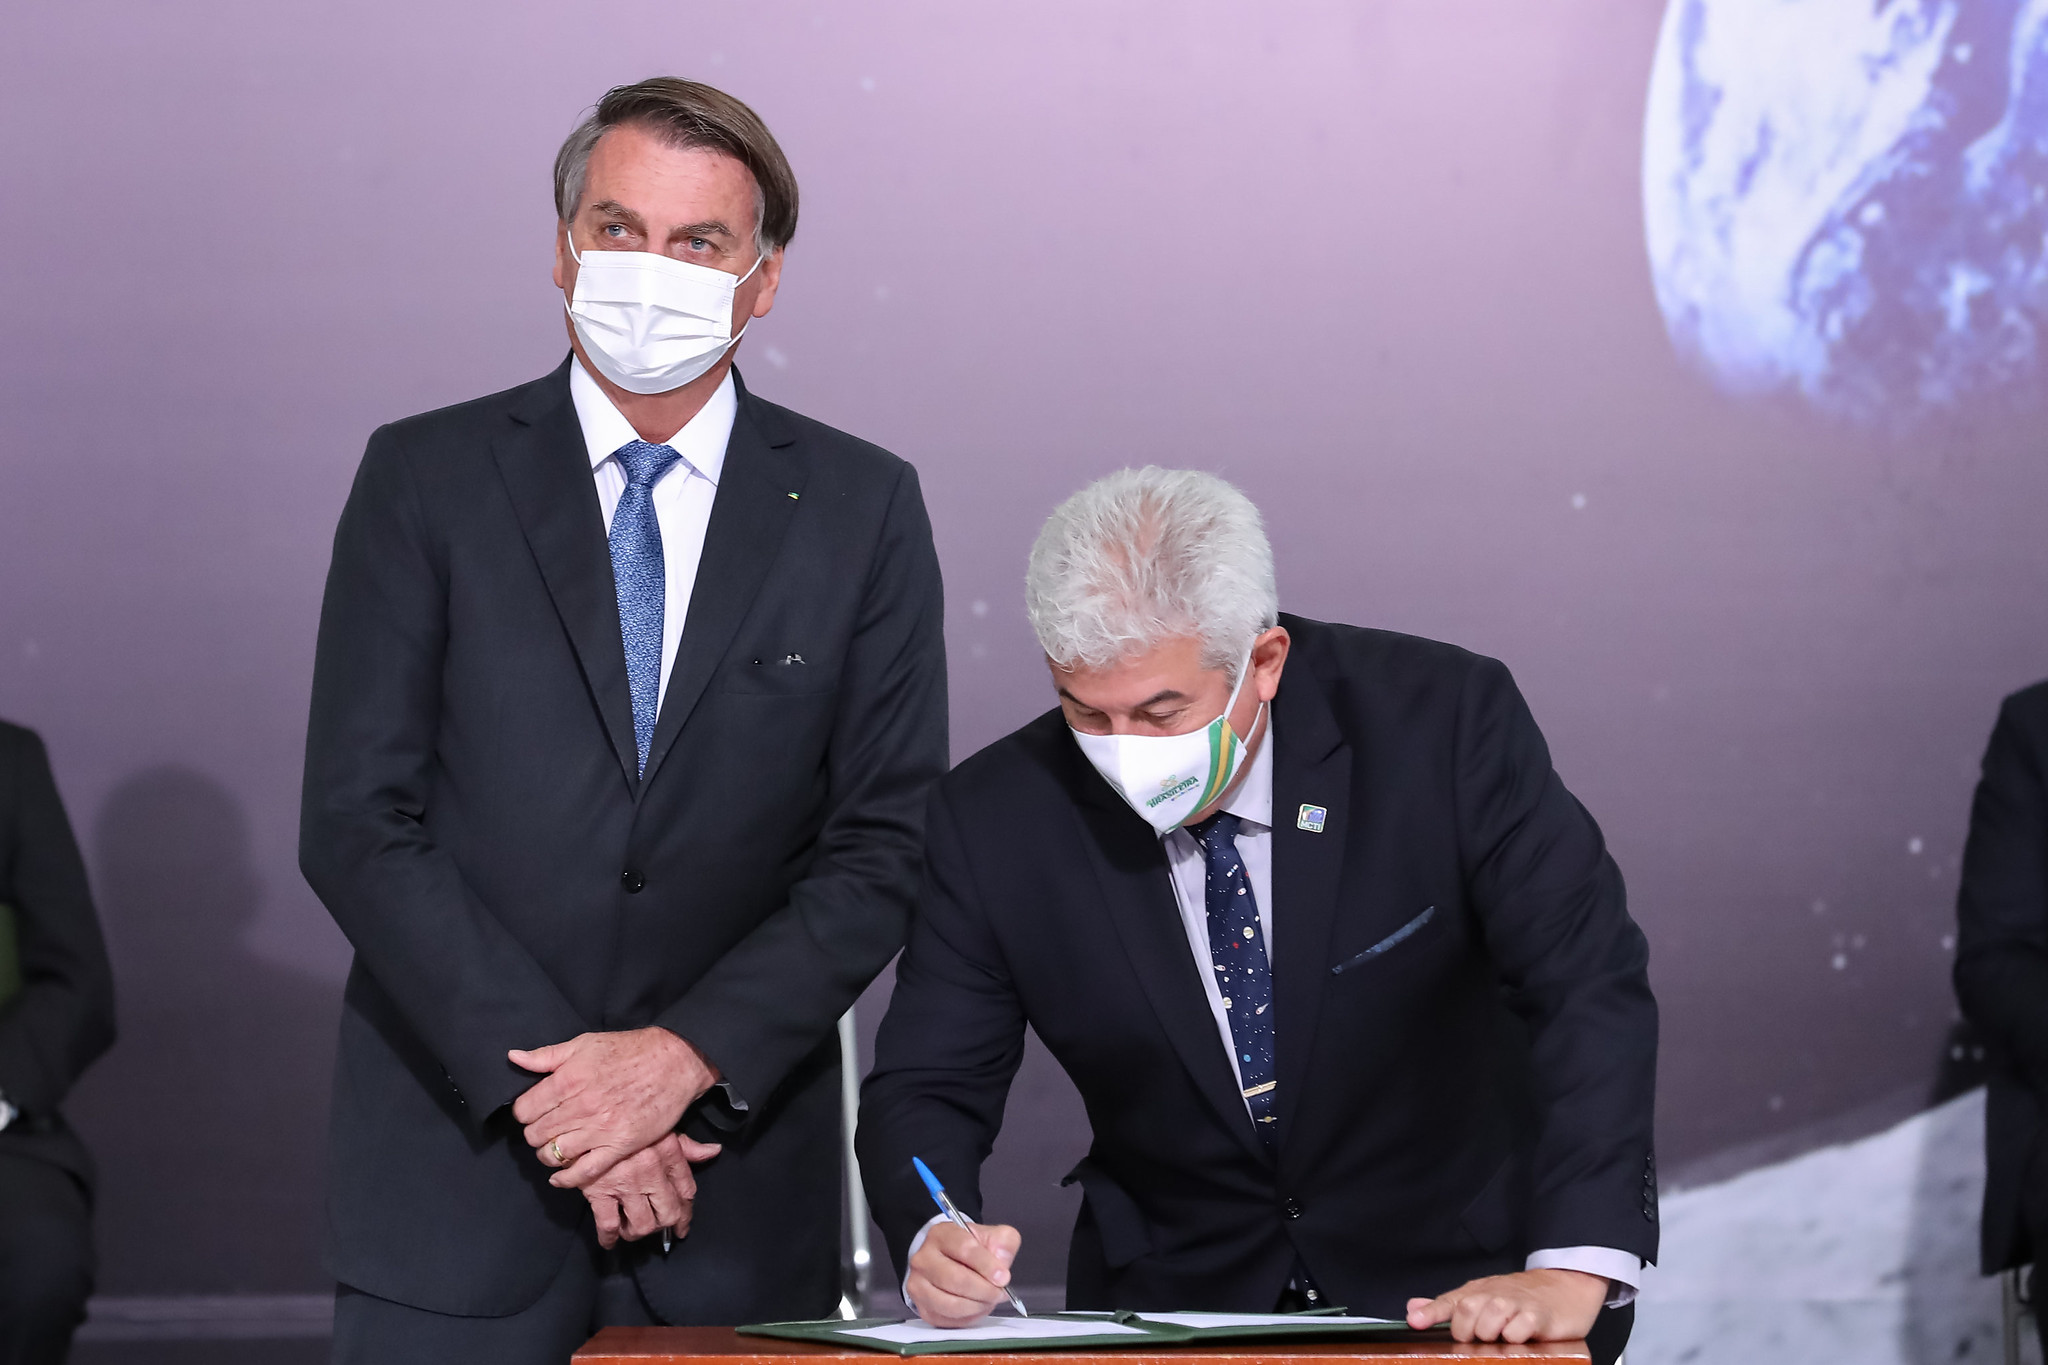 Brazil Minister of Science, Technology, and Innovation Marcos Pontes signs the Artemis Accords as President Jair Bolsonaro looks on during a ceremony at the Palácio do Planalto in Brasilia Tuesday, June 15, 2021.